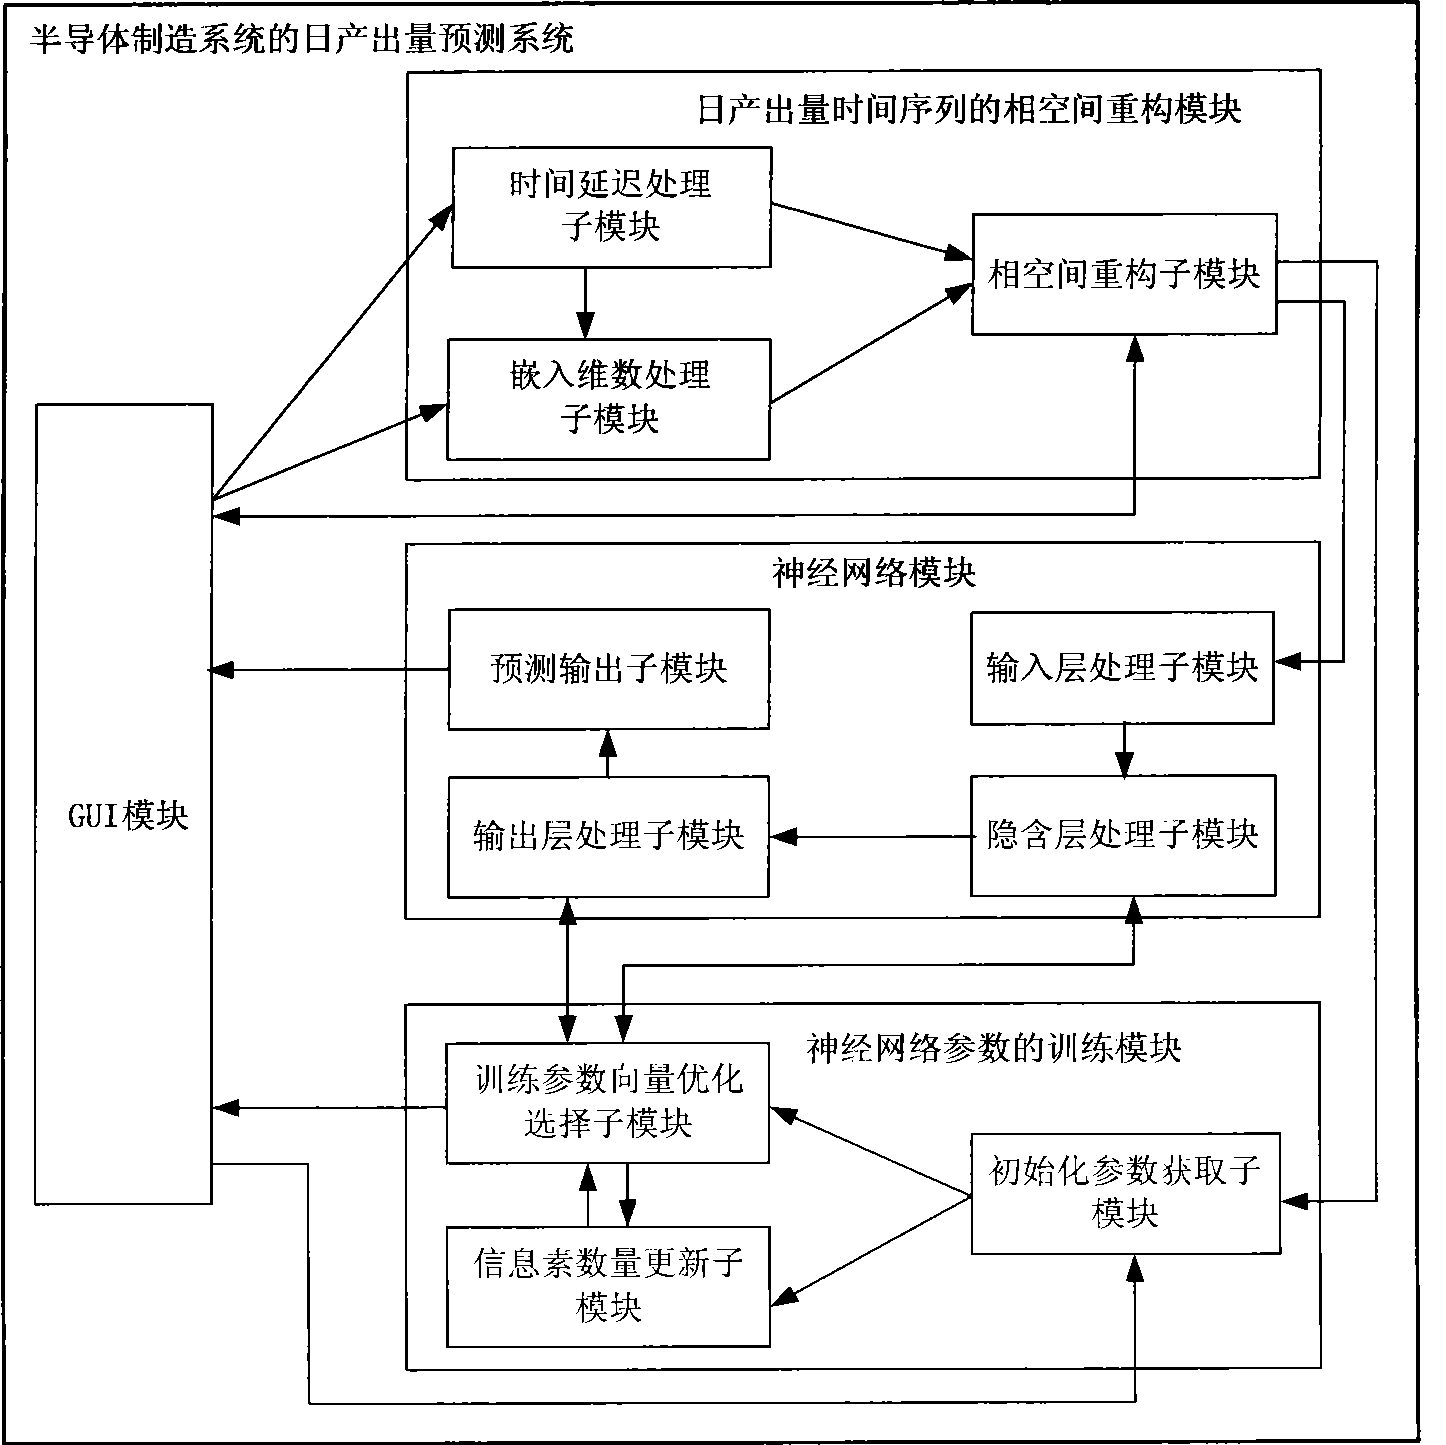 Daily throughput estimation system for semi-conductor manufacturing system